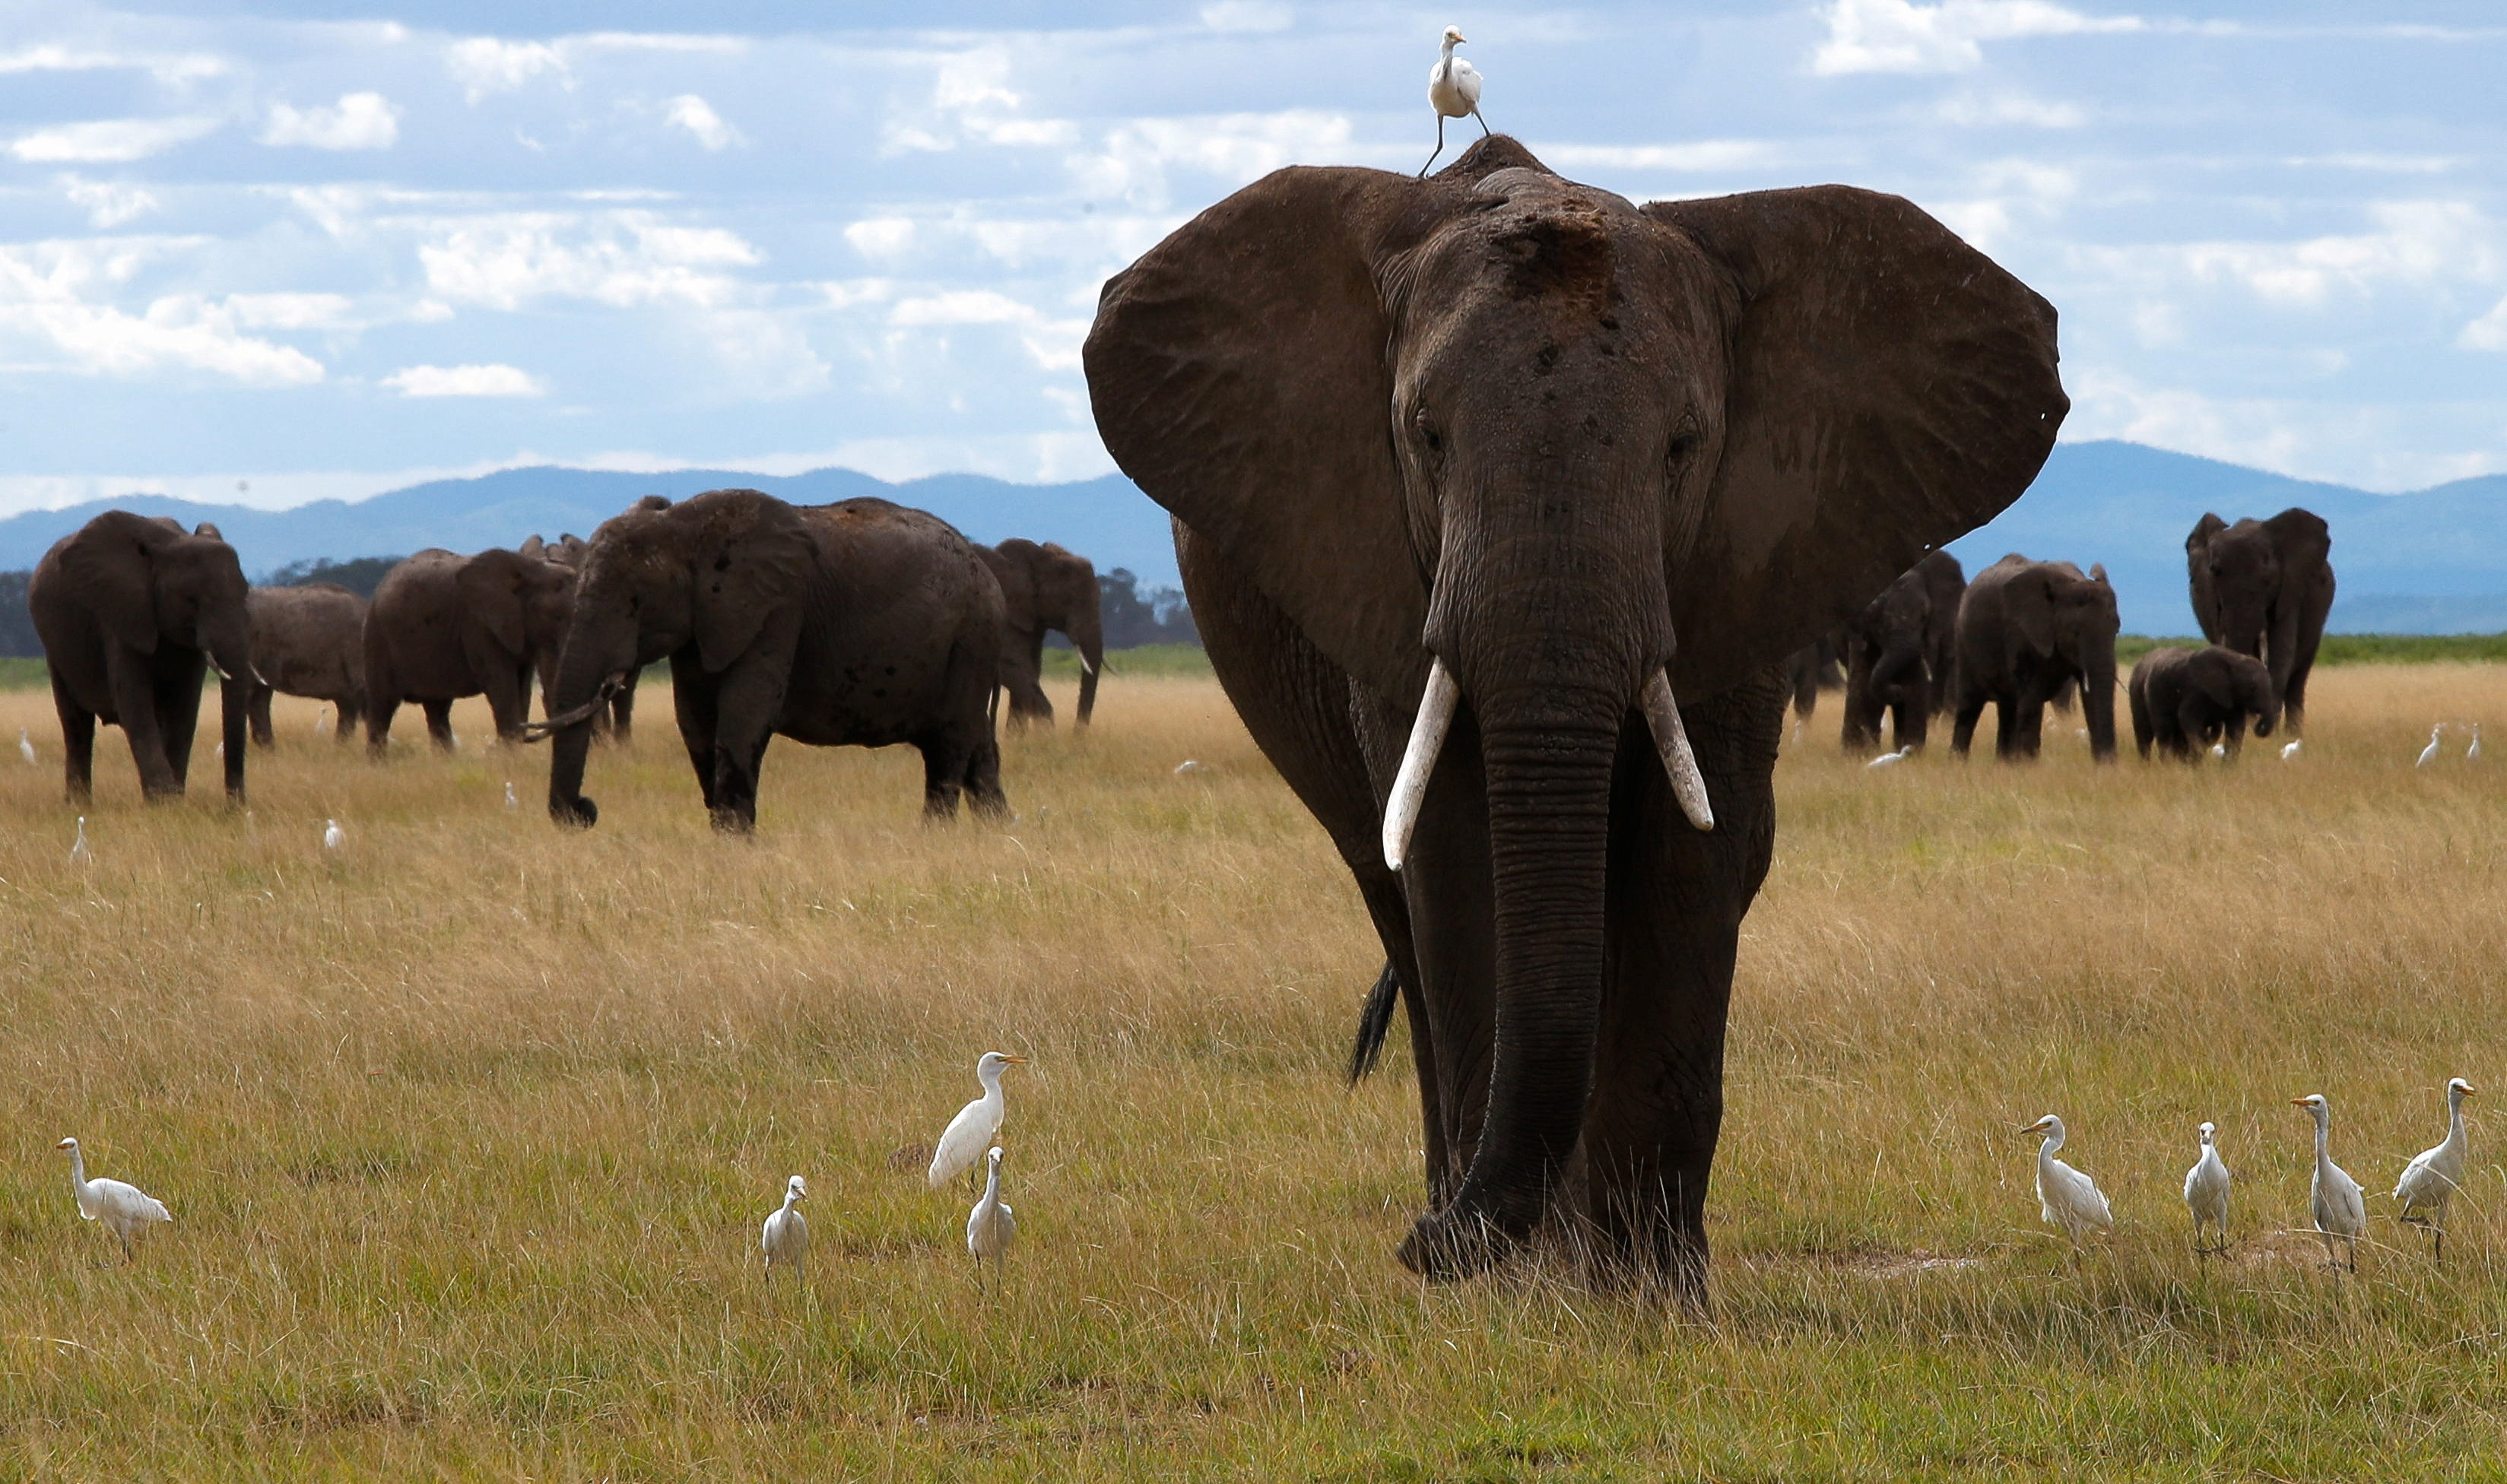 A bird perches on an elephant as it walks at the Amboseli National Park in Kajiado County